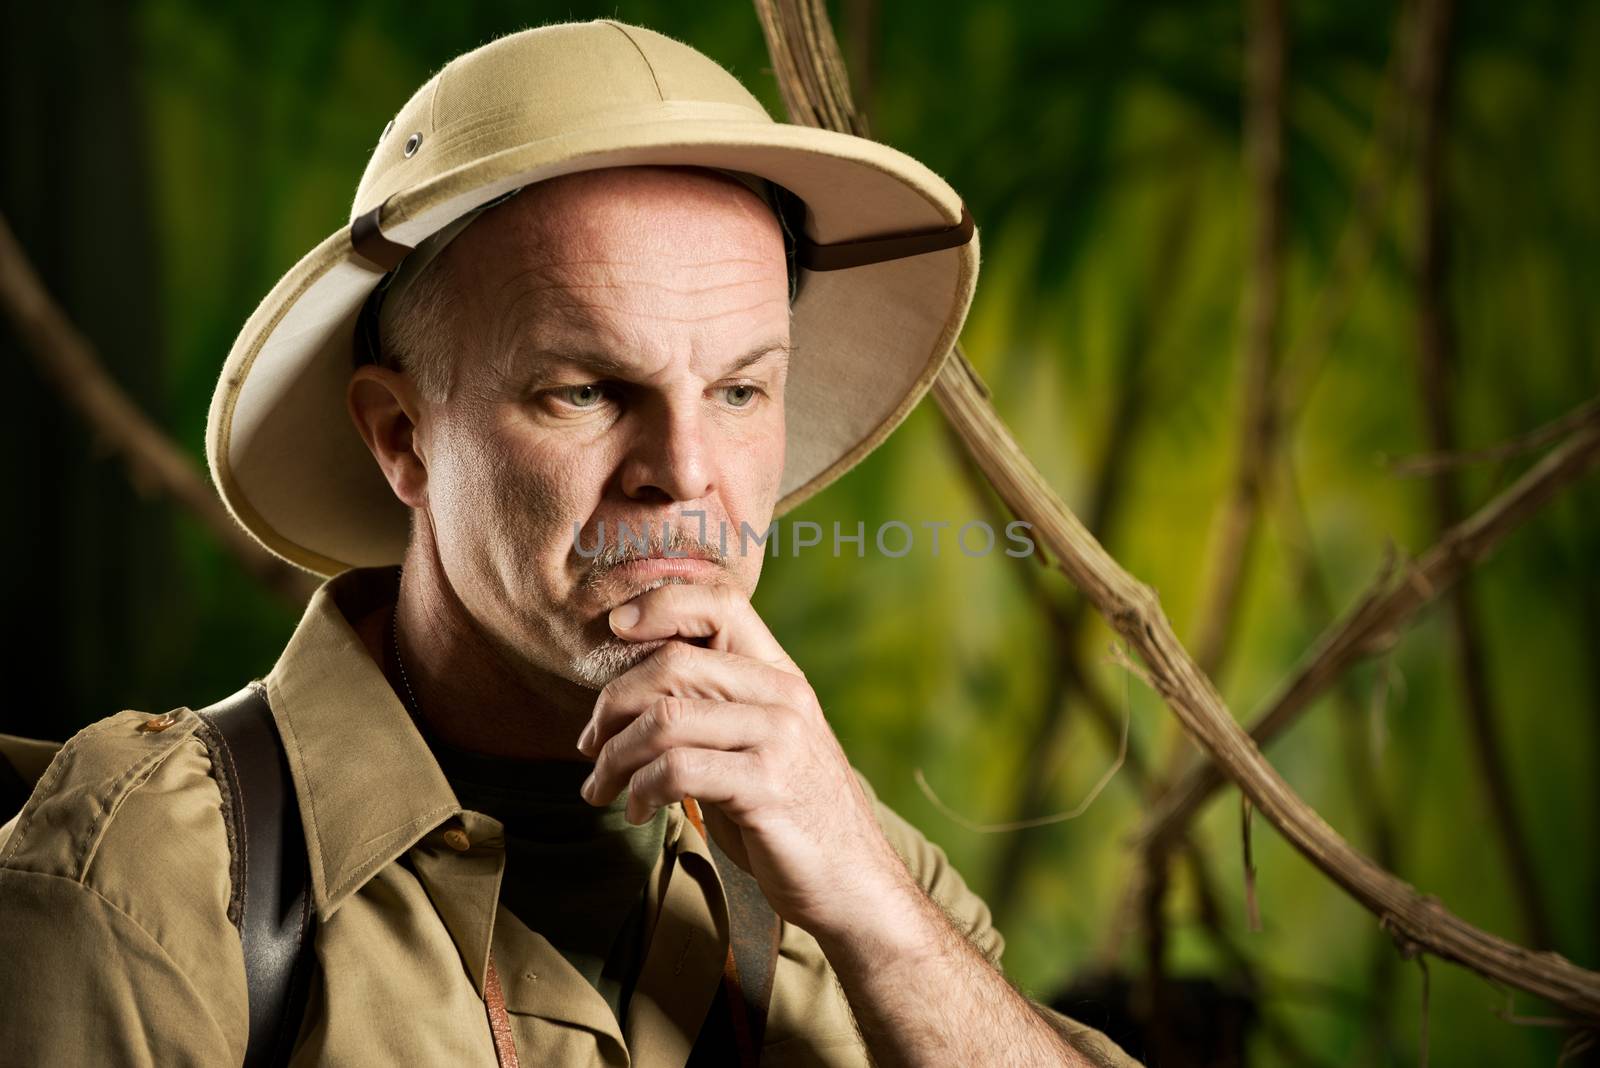 Retro adventurer in the jungle thinking with hand on chin.